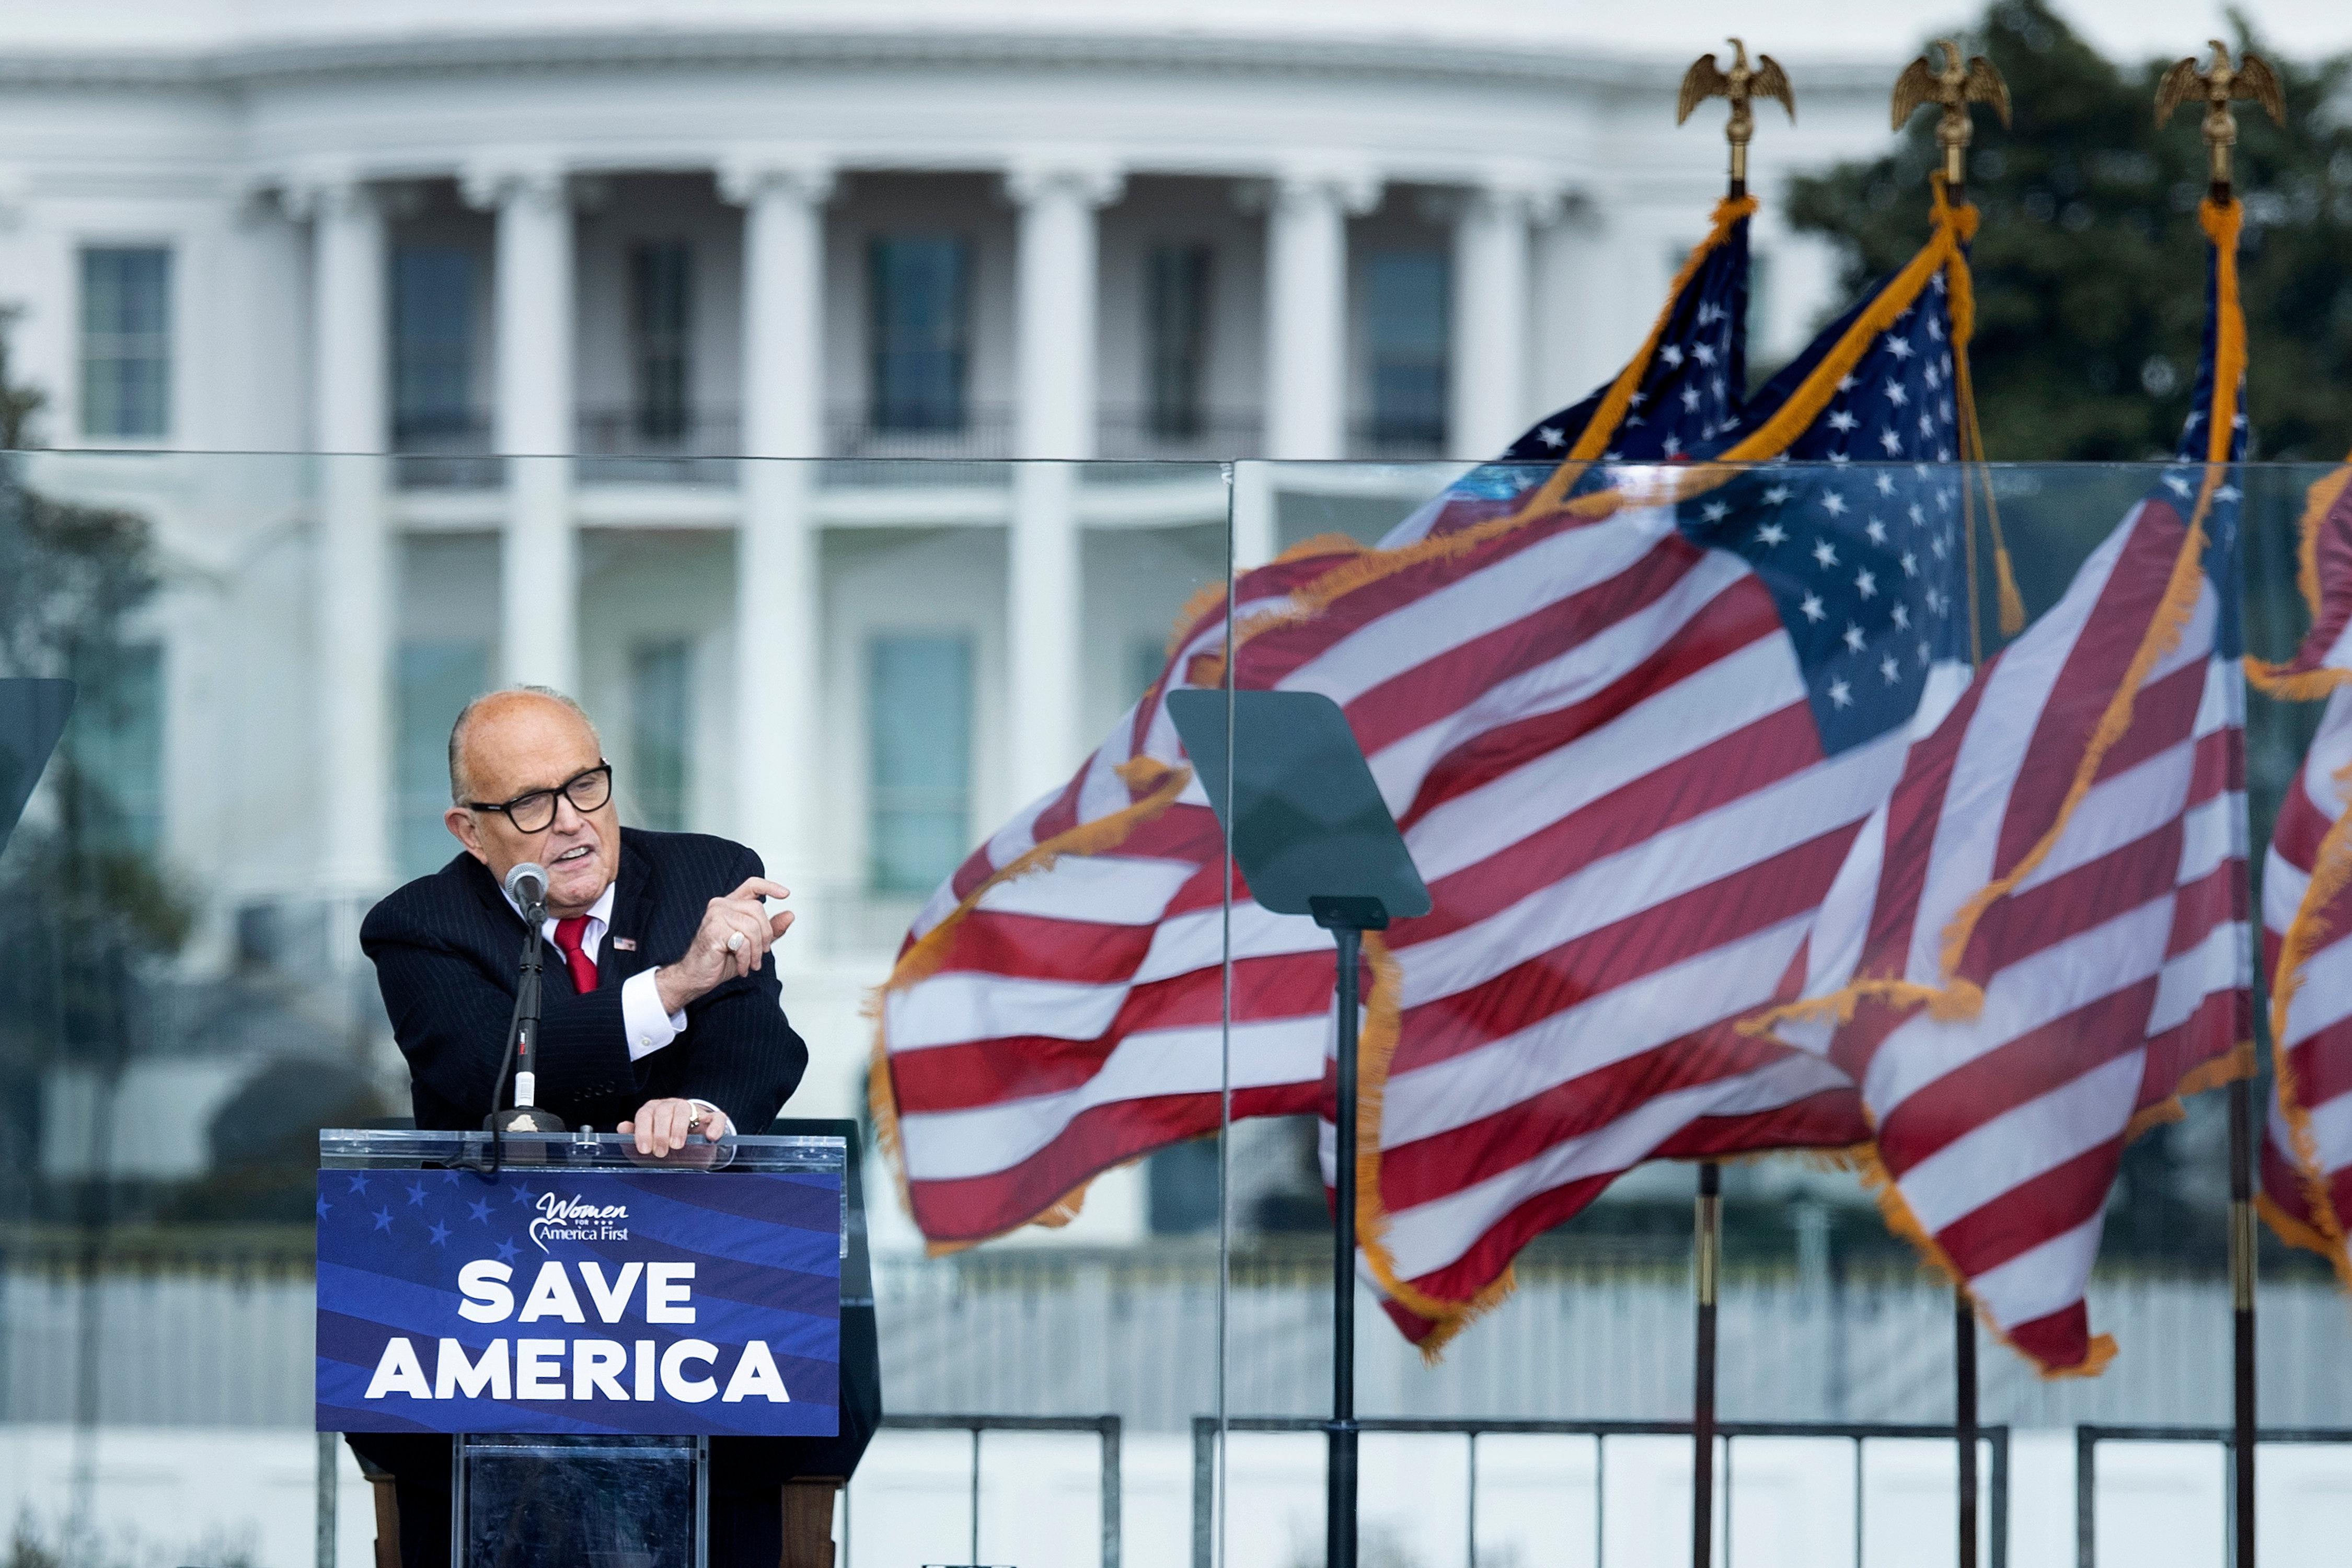 Rudy Giuliani speaks at a podium that says "Save America" with American flags waving beside him. The White House can be seen in the distance behind Giuliani.